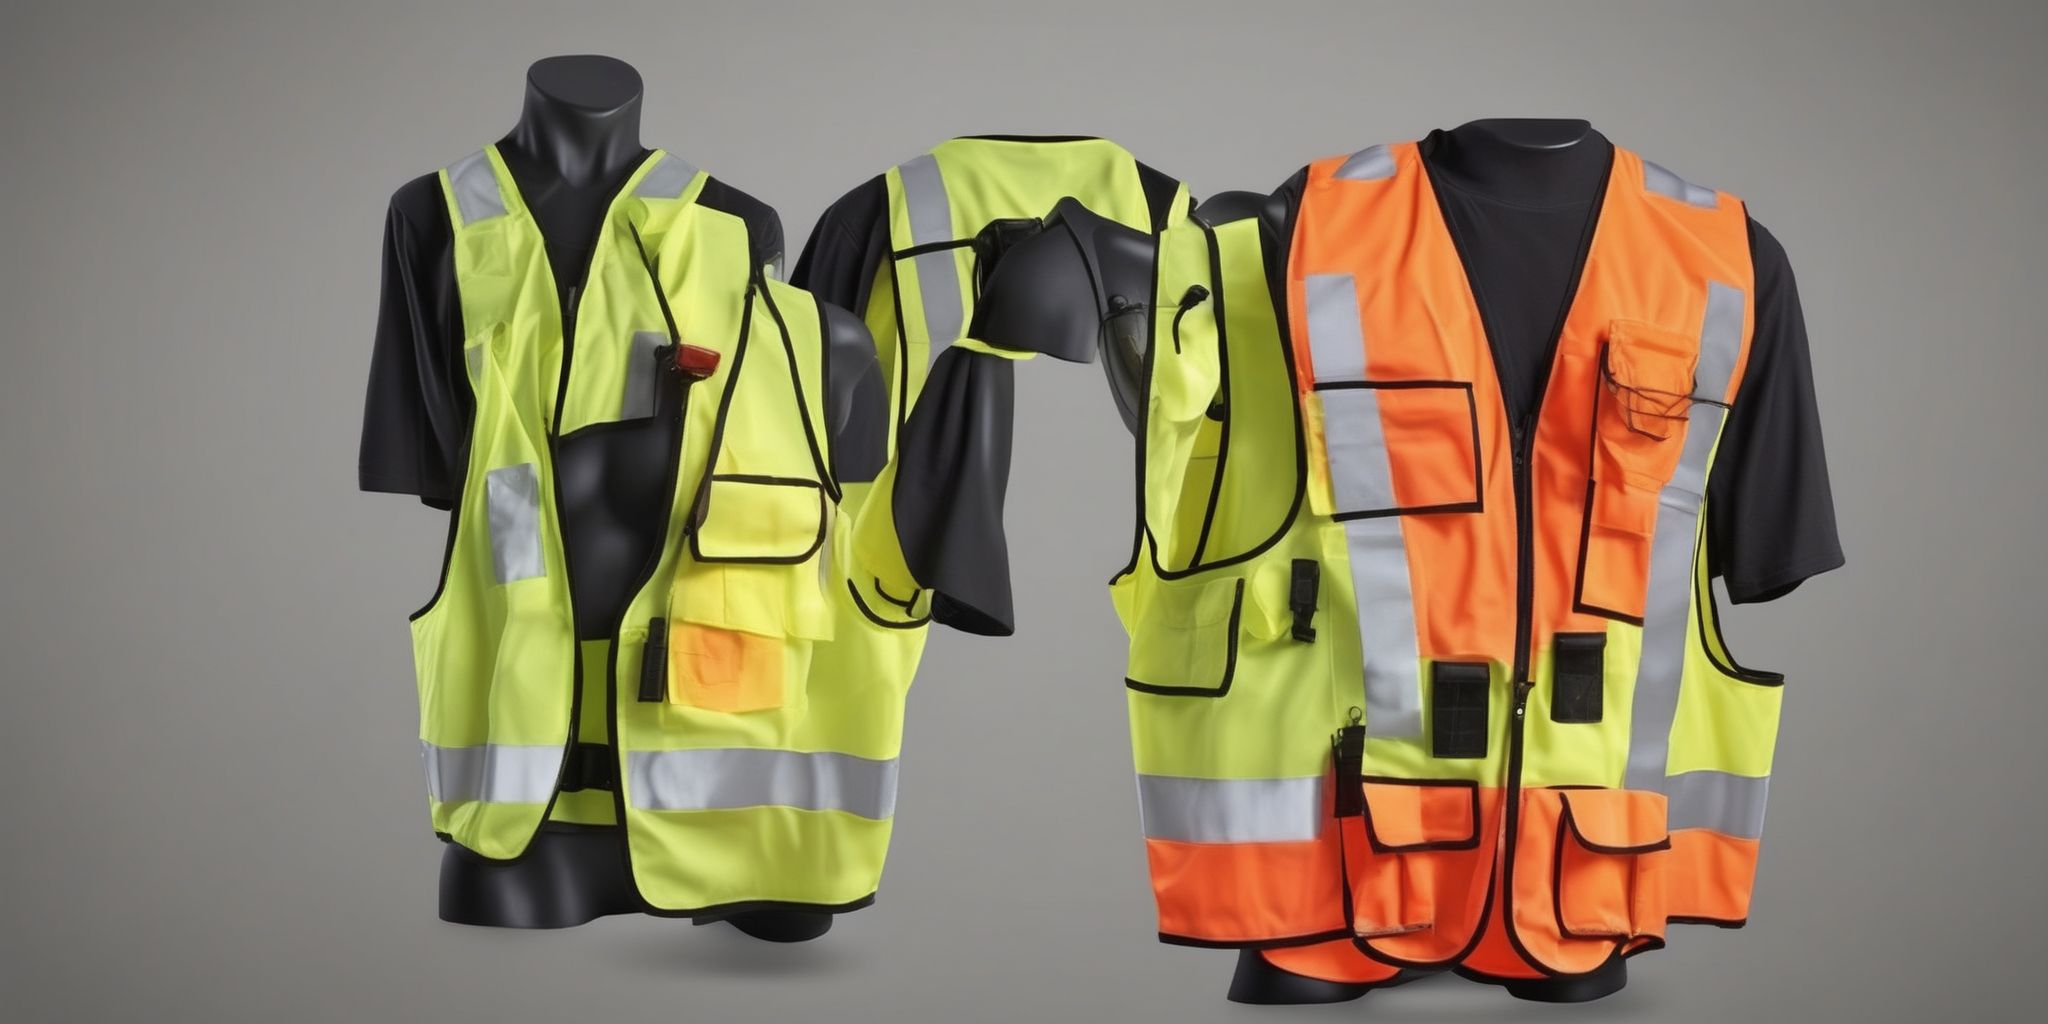 Safety vest  in realistic, photographic style